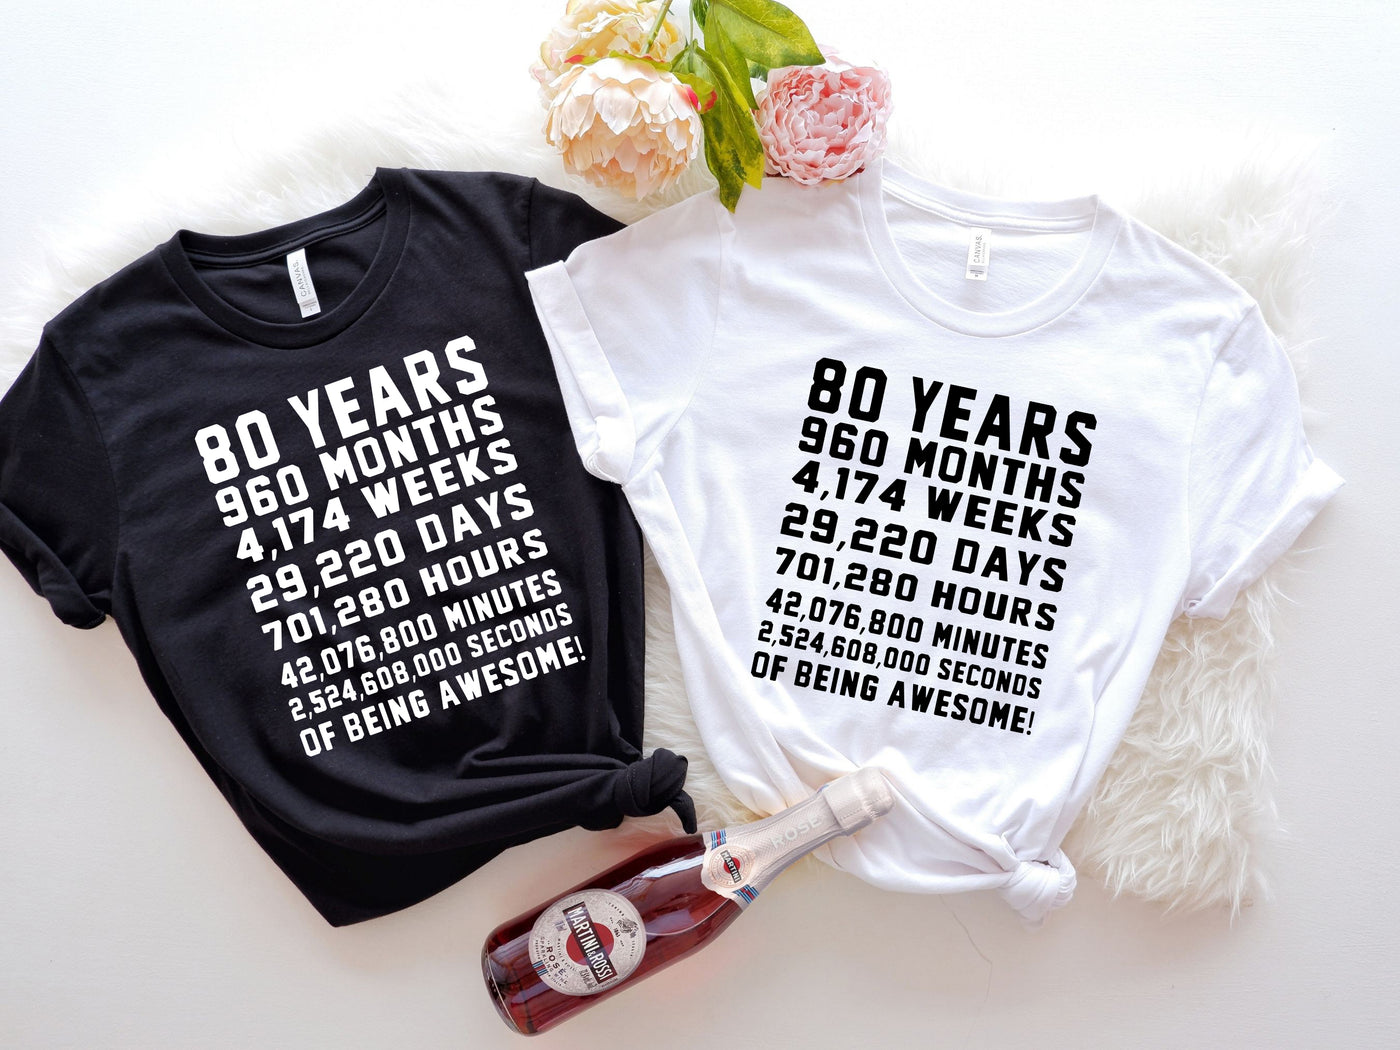 80 Years 960 Months